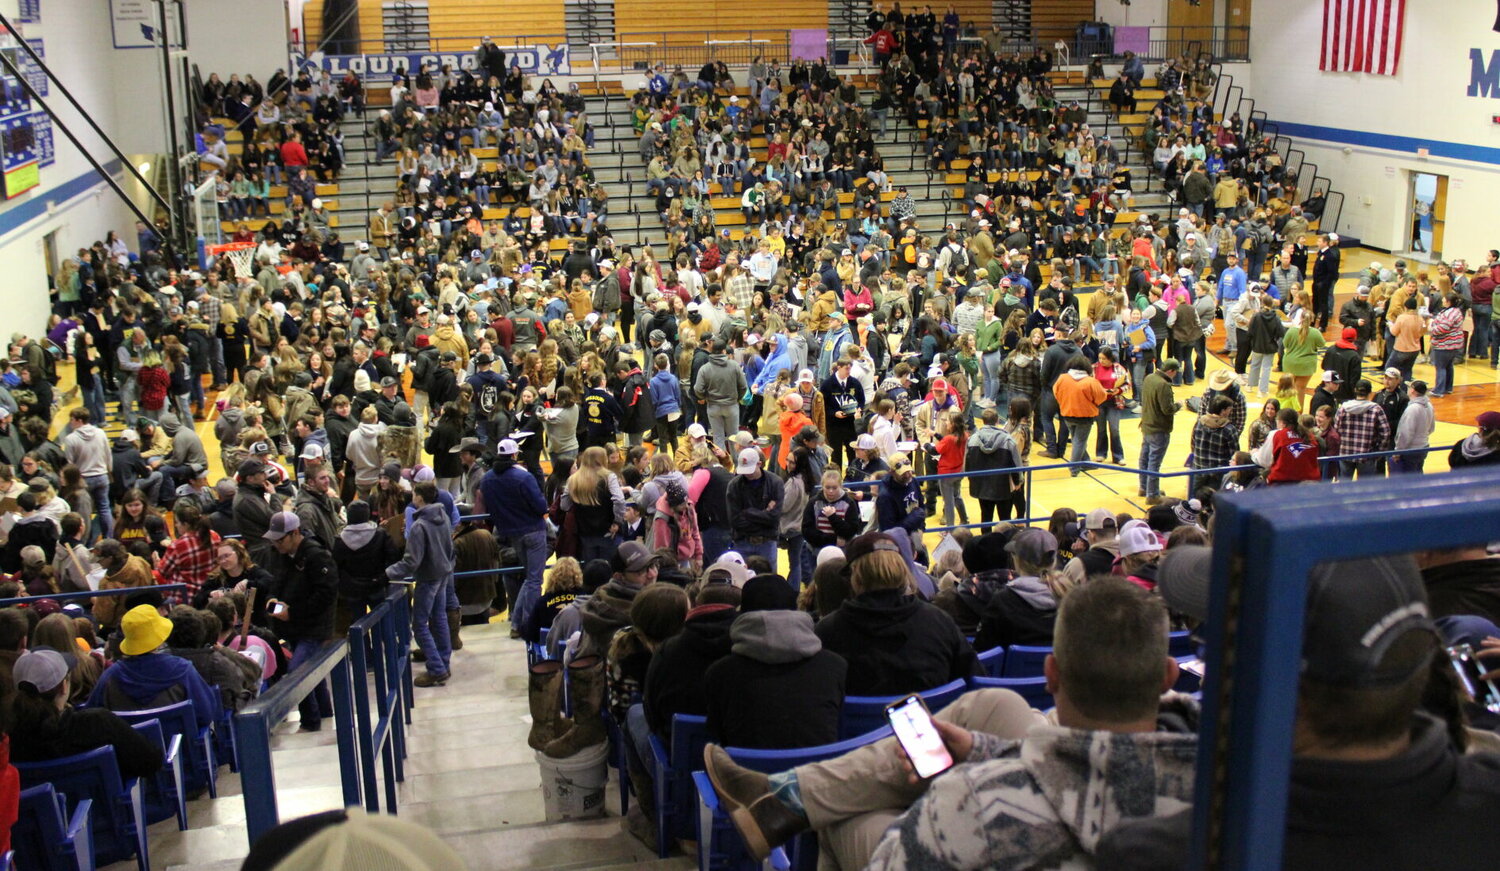 What a turnout. Over 1,800 students from over 80 different schools gathered in the Marshfield High School gym to participate in the Marshfield FFA Chapter and Booster Club's fourth annual Career Development Event held Mar. 18.